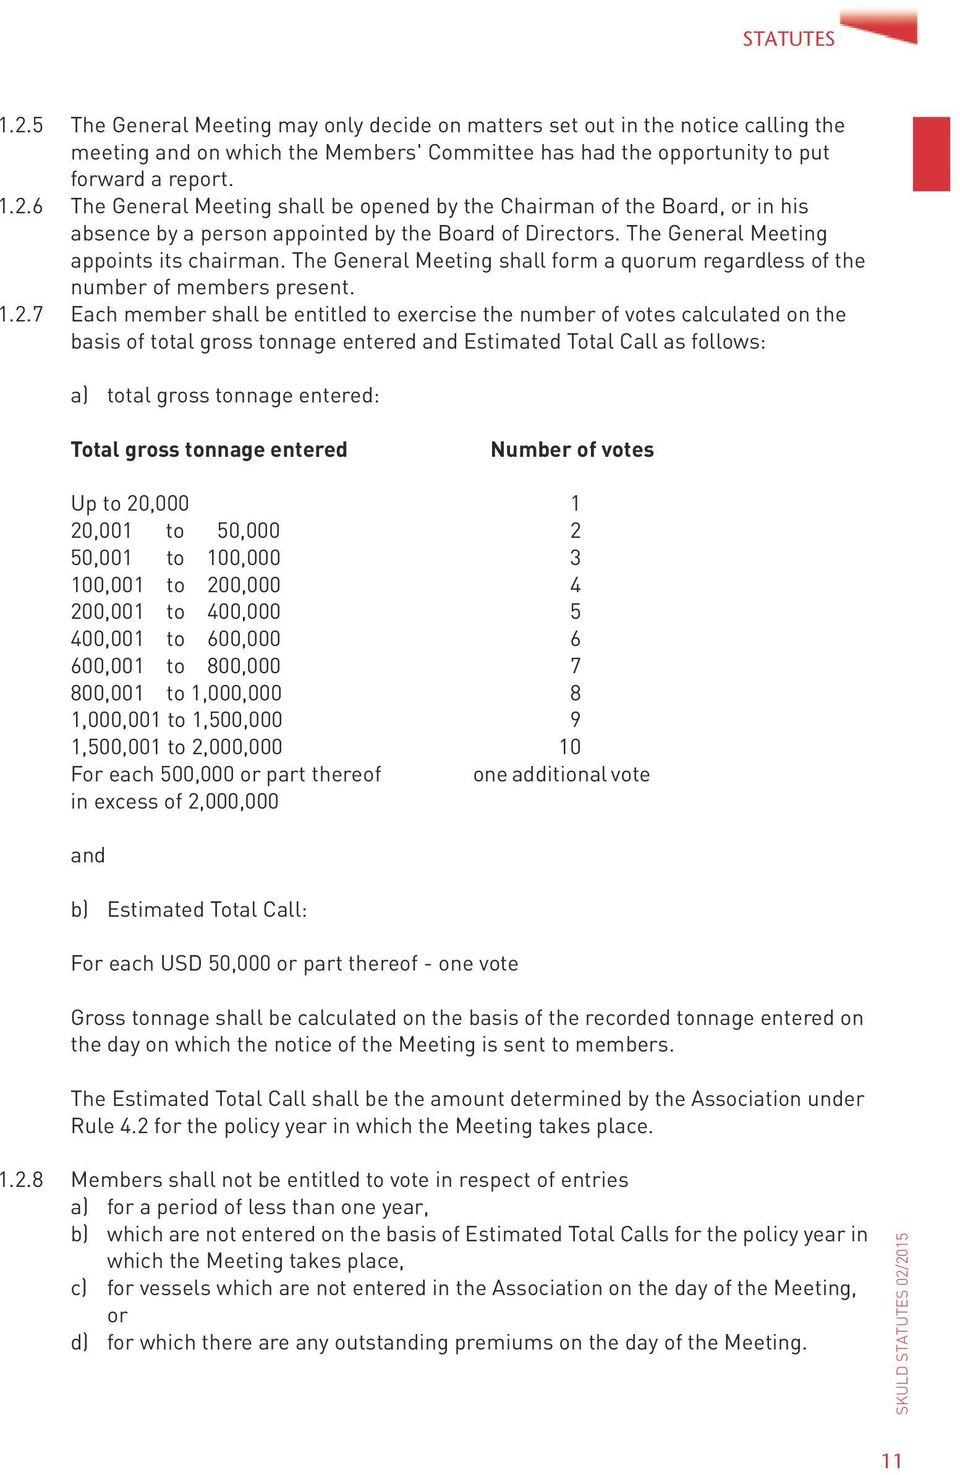 7 Each member shall be entitled to exercise the number of votes calculated on the basis of total gross tonnage entered and Estimated Total Call as follows: a) total gross tonnage entered: Total gross